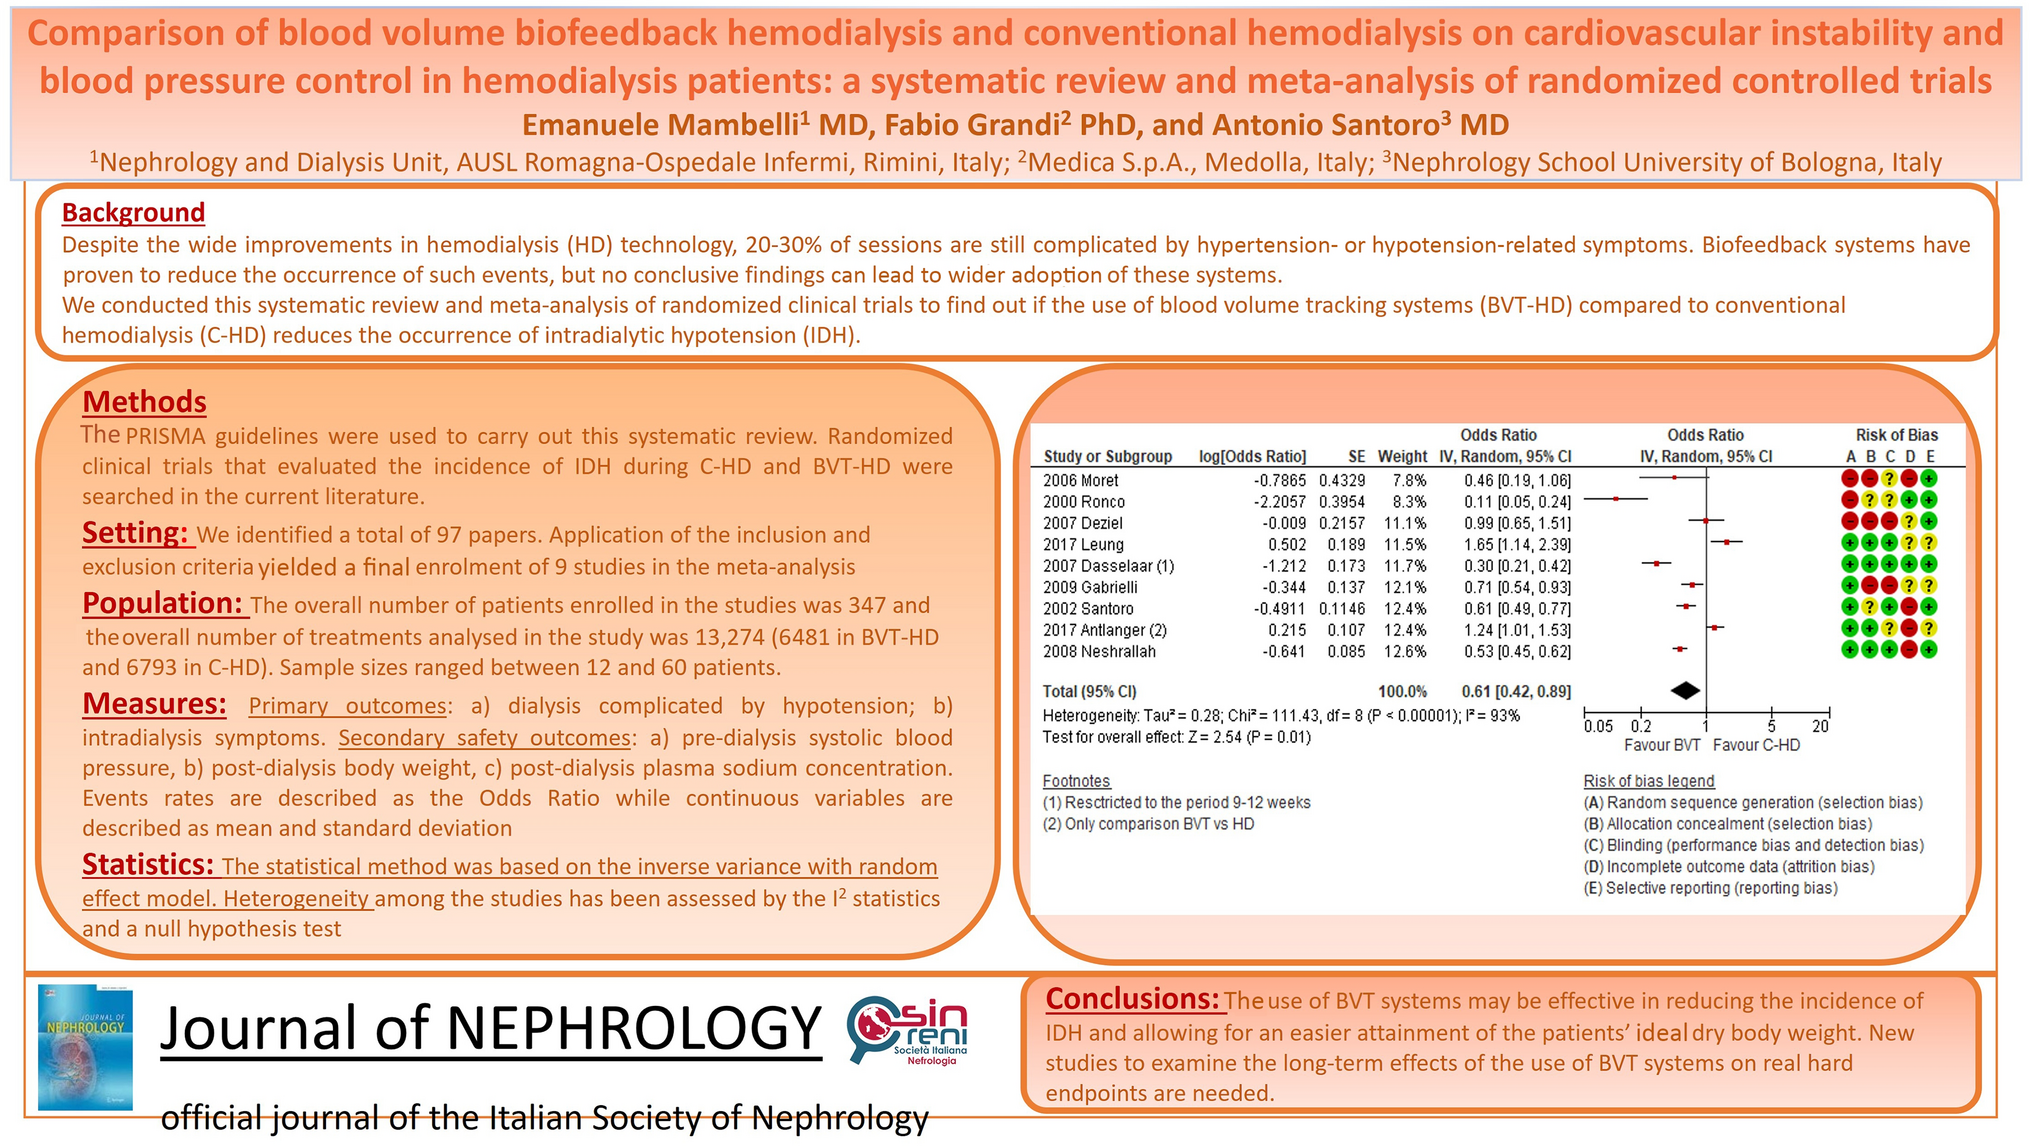 Comparison of blood volume biofeedback hemodialysis and conventional hemodialysis on cardiovascular stability and blood pressure control in hemodialysis patients: a systematic review and meta-analysis of randomized controlled trials